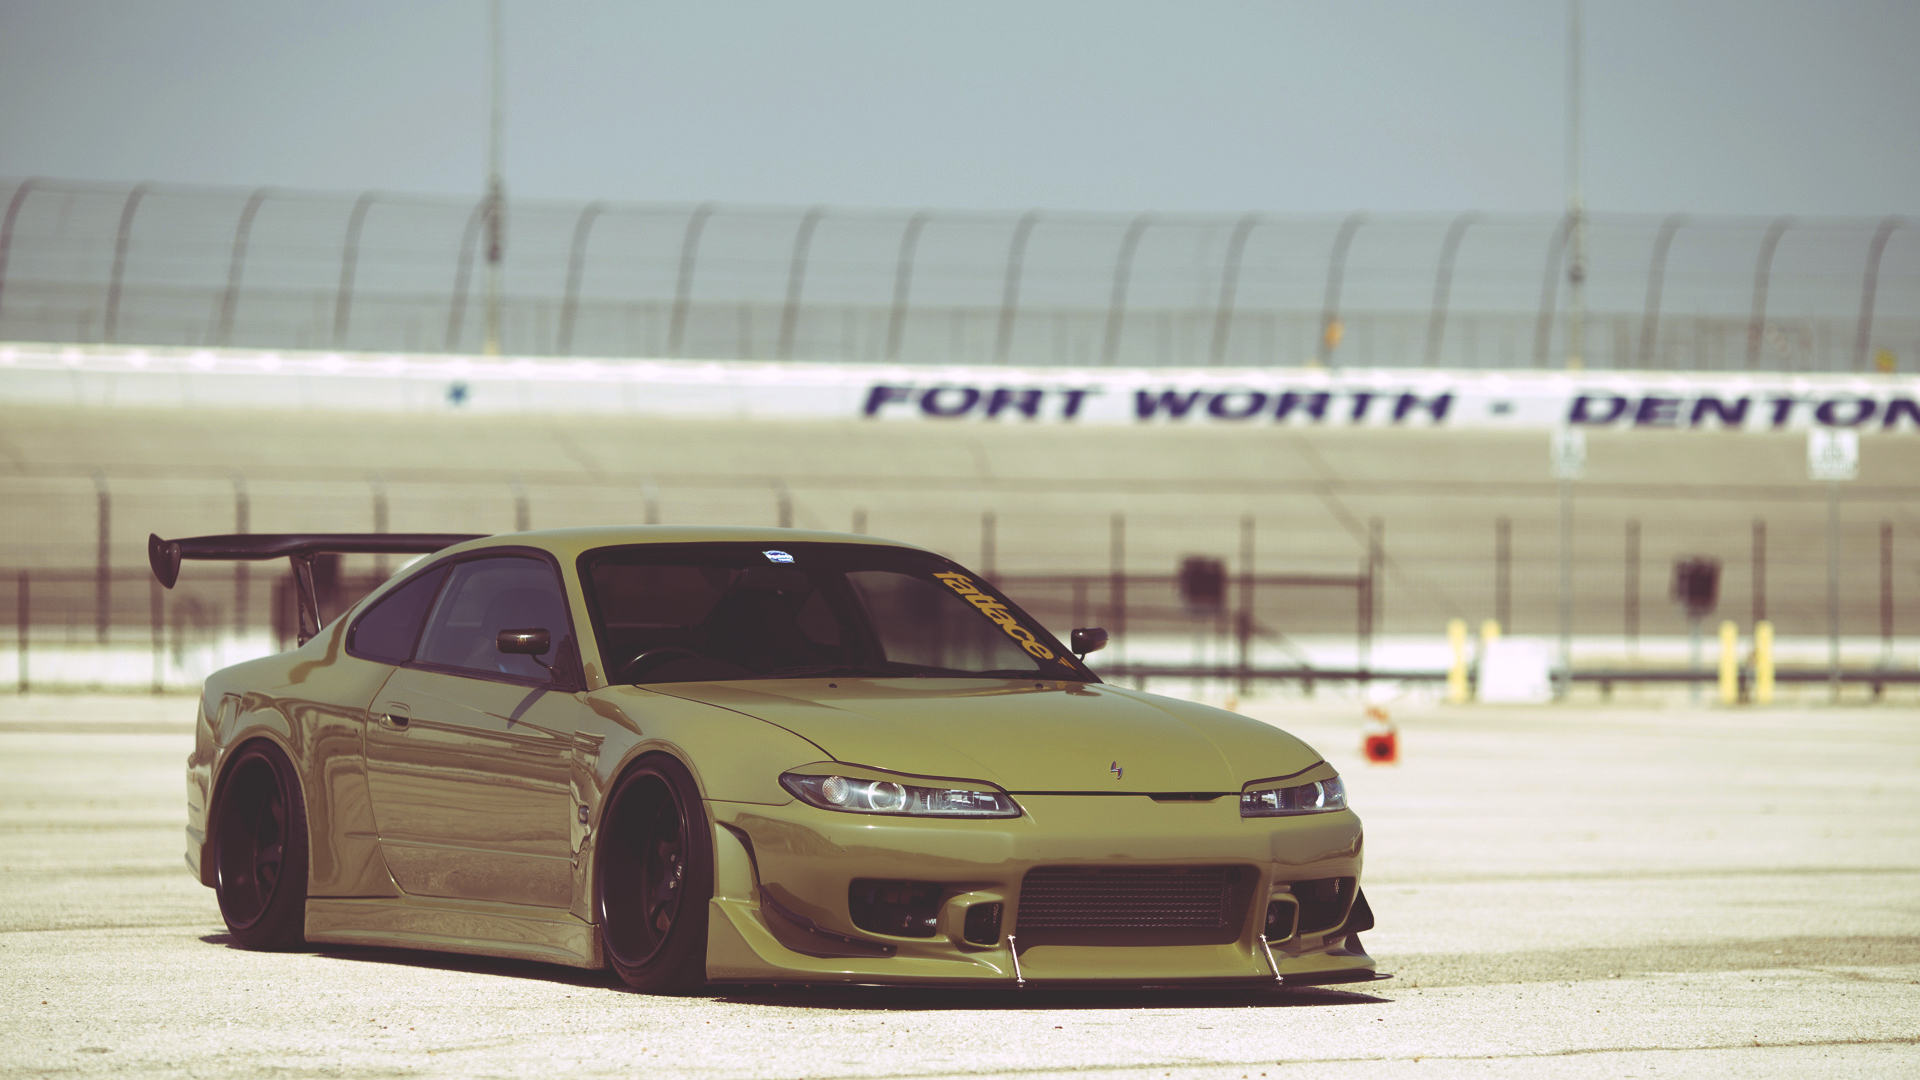 1920x1080 10+ Nissan Silvia S15 HD Wallpapers and Backgrounds